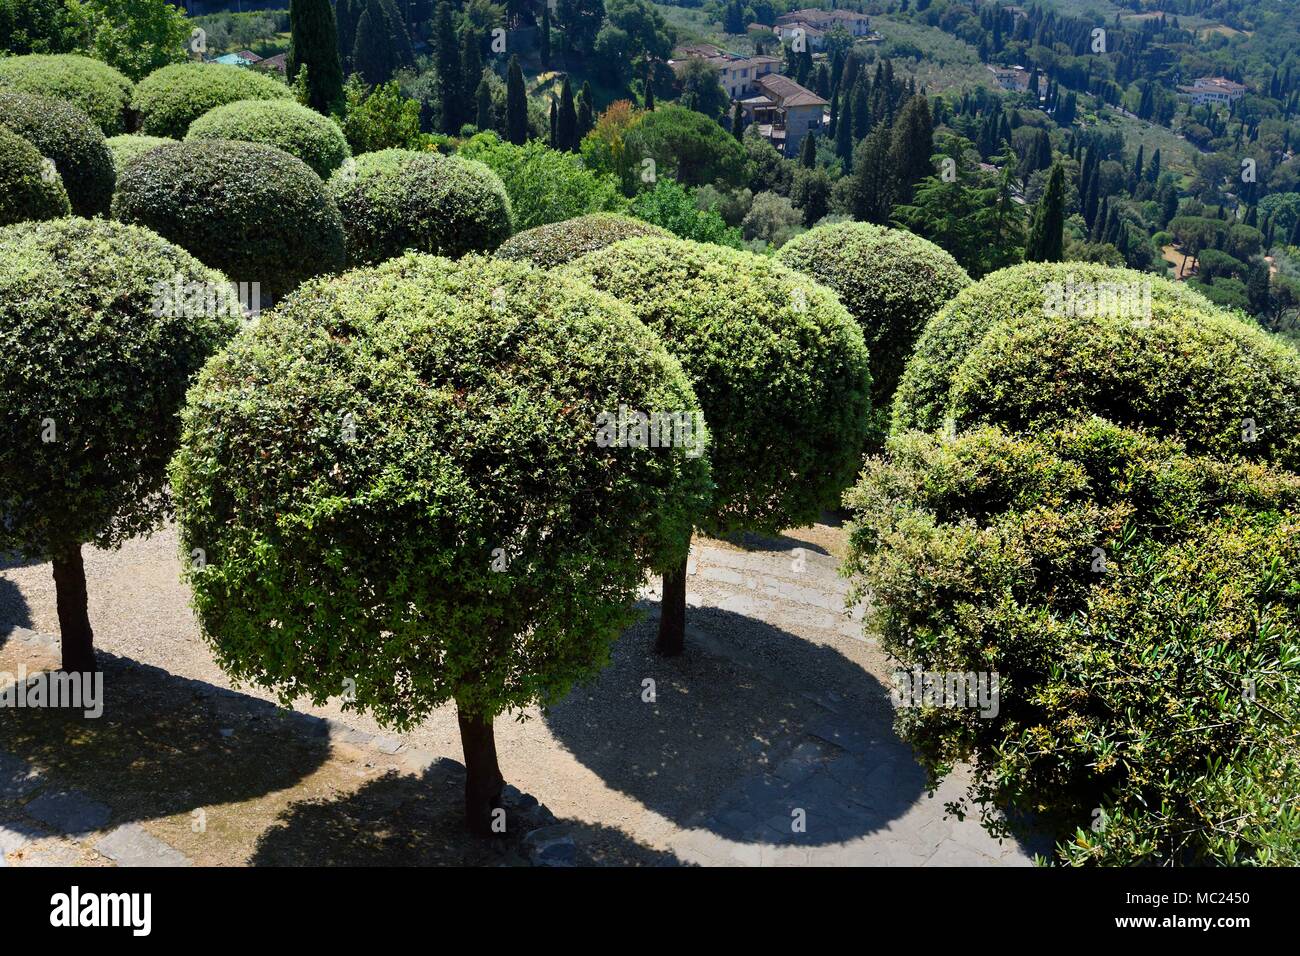 Fiesole is a town on a scenic height above Florence, 8 kilometres (5 mi) northeast of that city. The Decameron by Giovanni Boccaccio is set in the slopes of Fiesole.Tuscany, Italy - Italian. Stock Photo